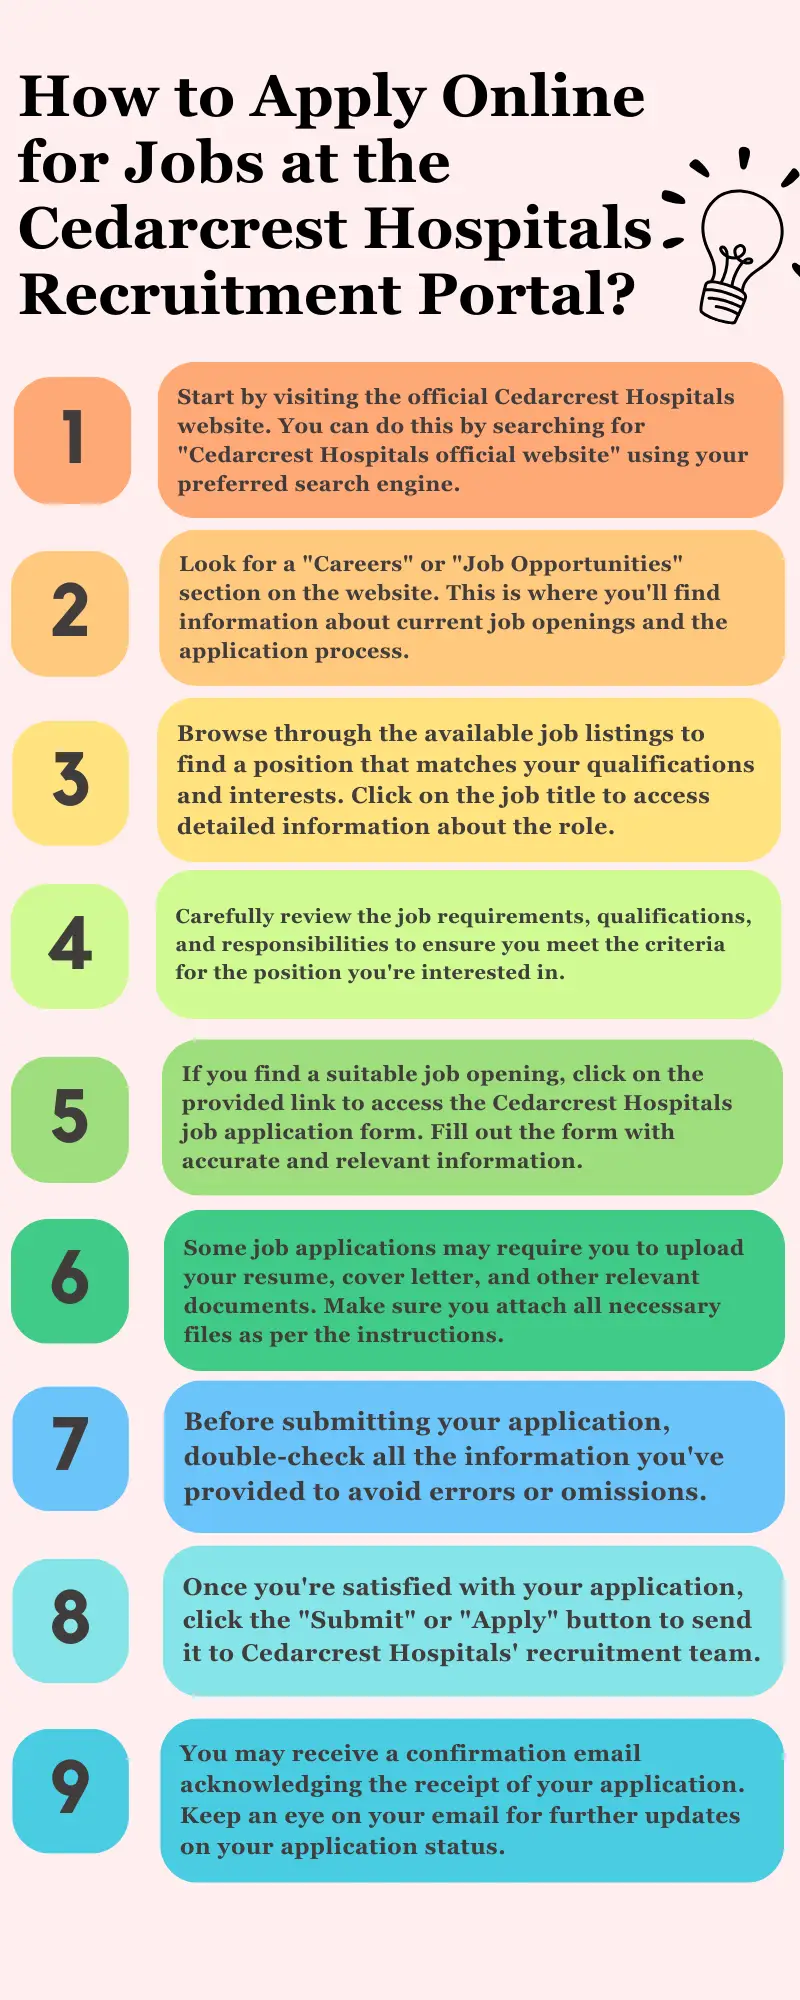 How to Apply Online for Jobs at the Cedarcrest Hospitals Recruitment Portal?